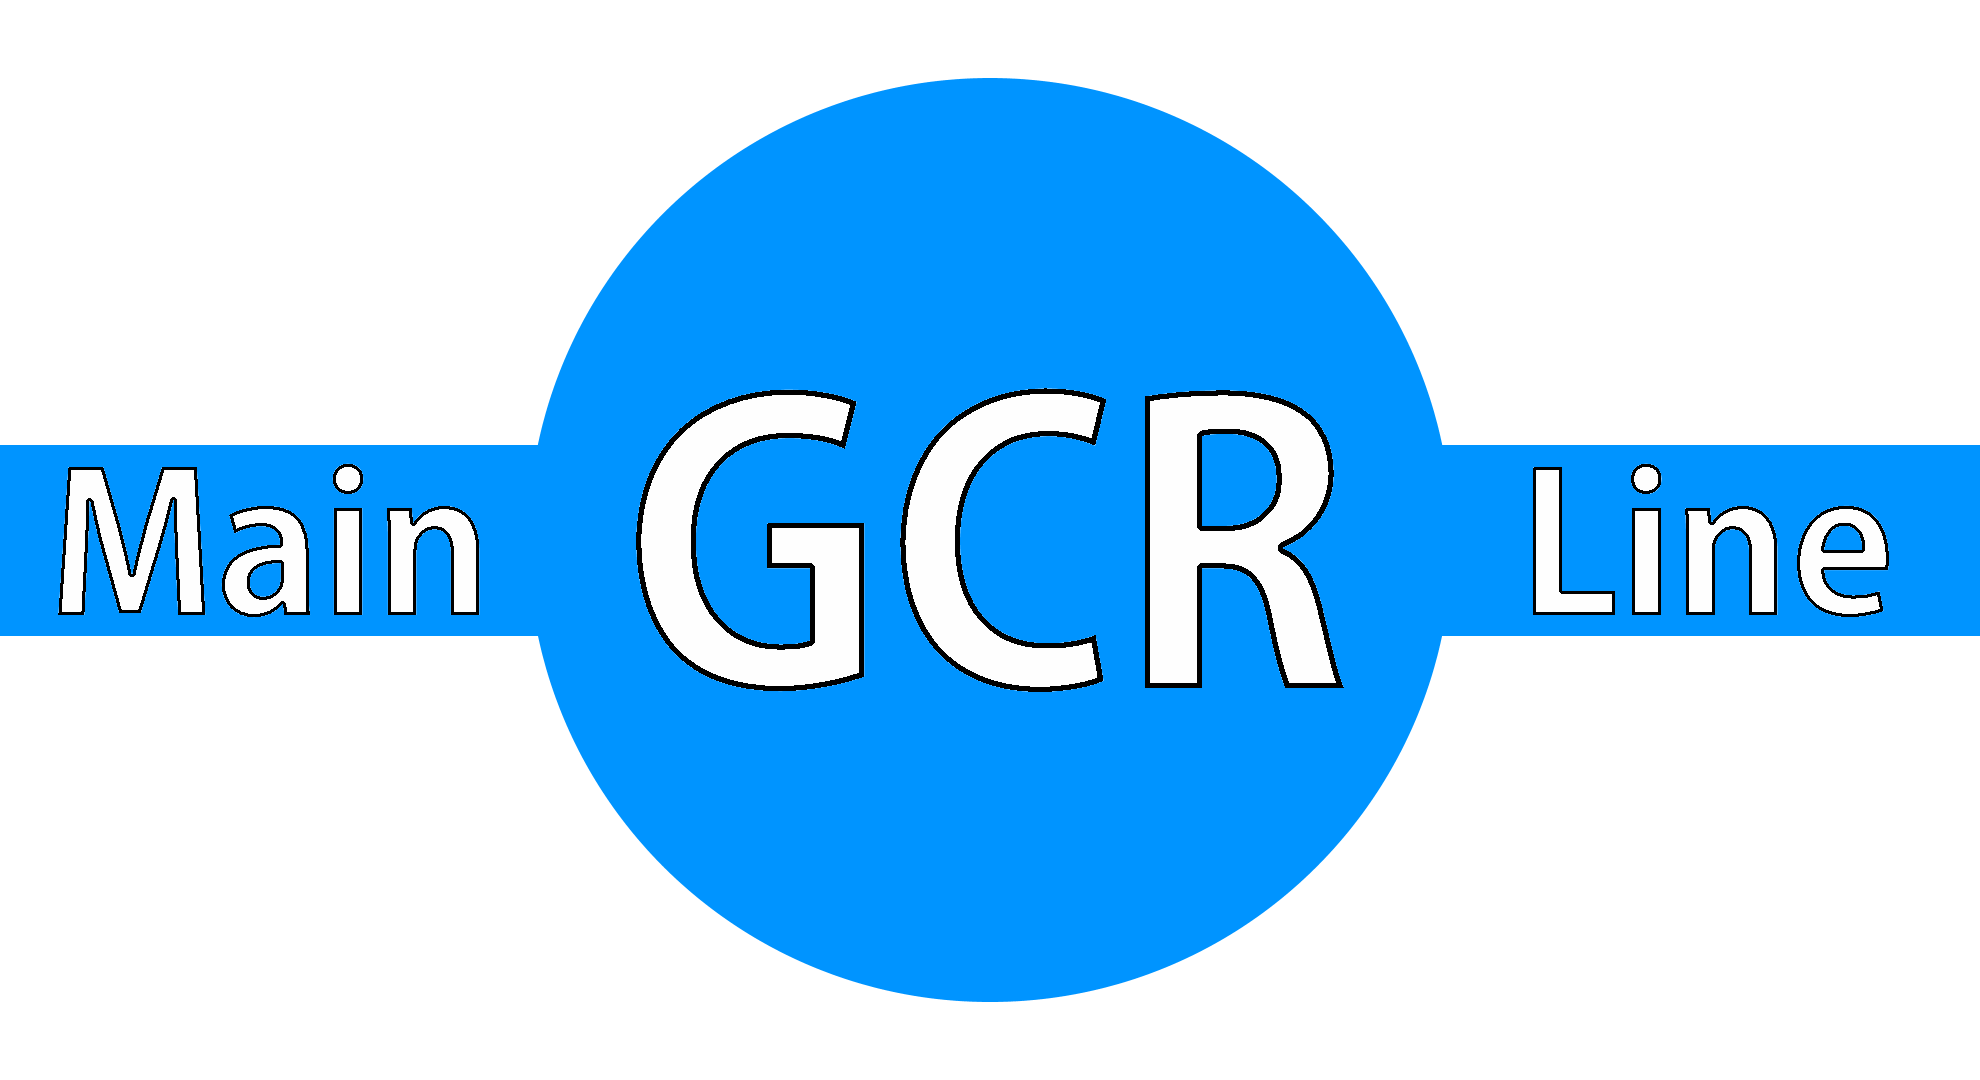 Problems On The Network - gcr logo roblox